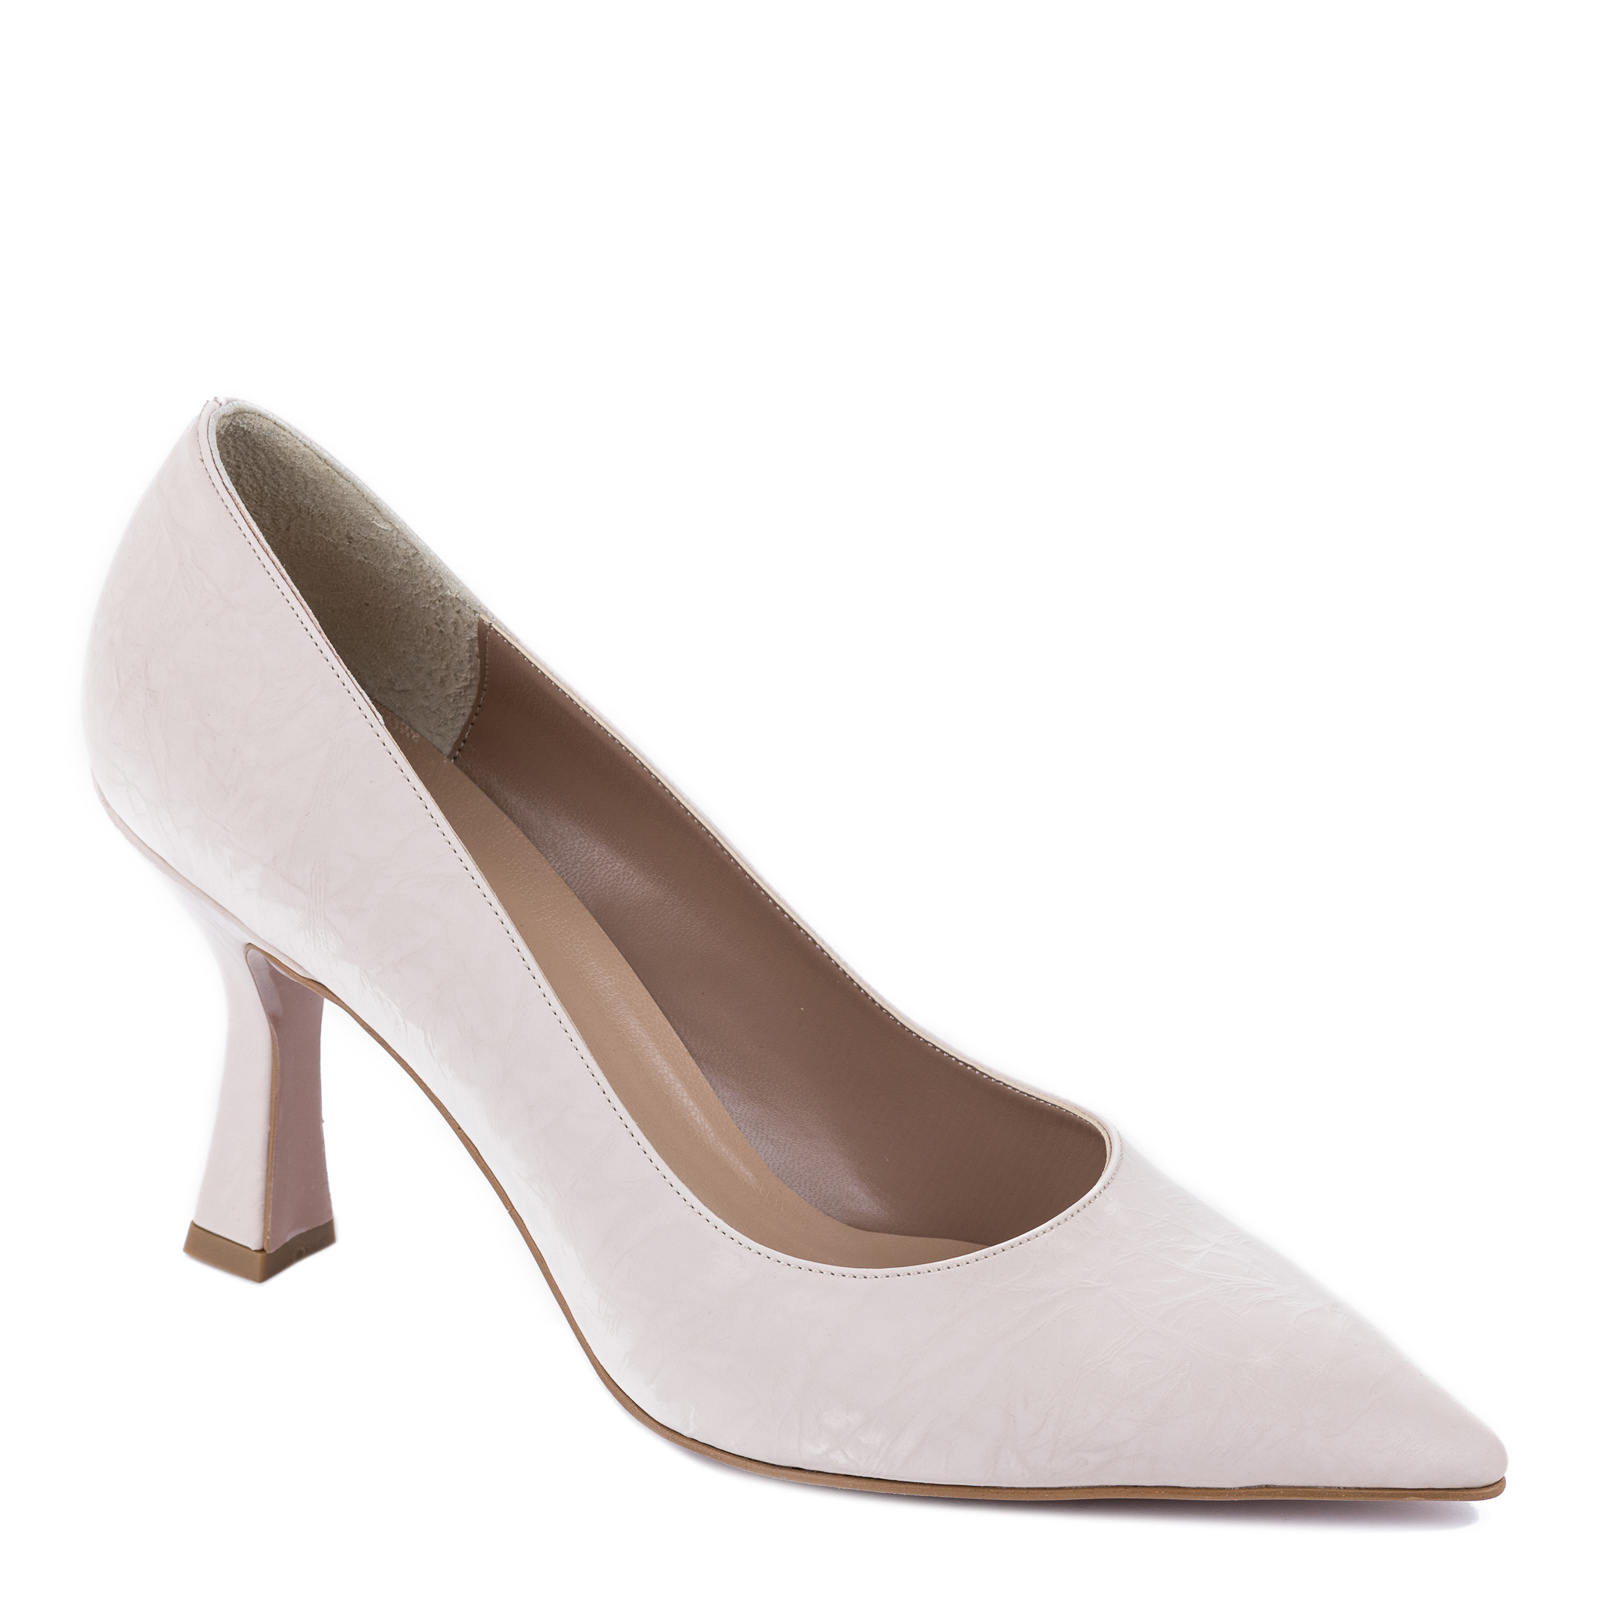 POINTED STILETTO SHOES WITH THIN HEEL - BEIGE